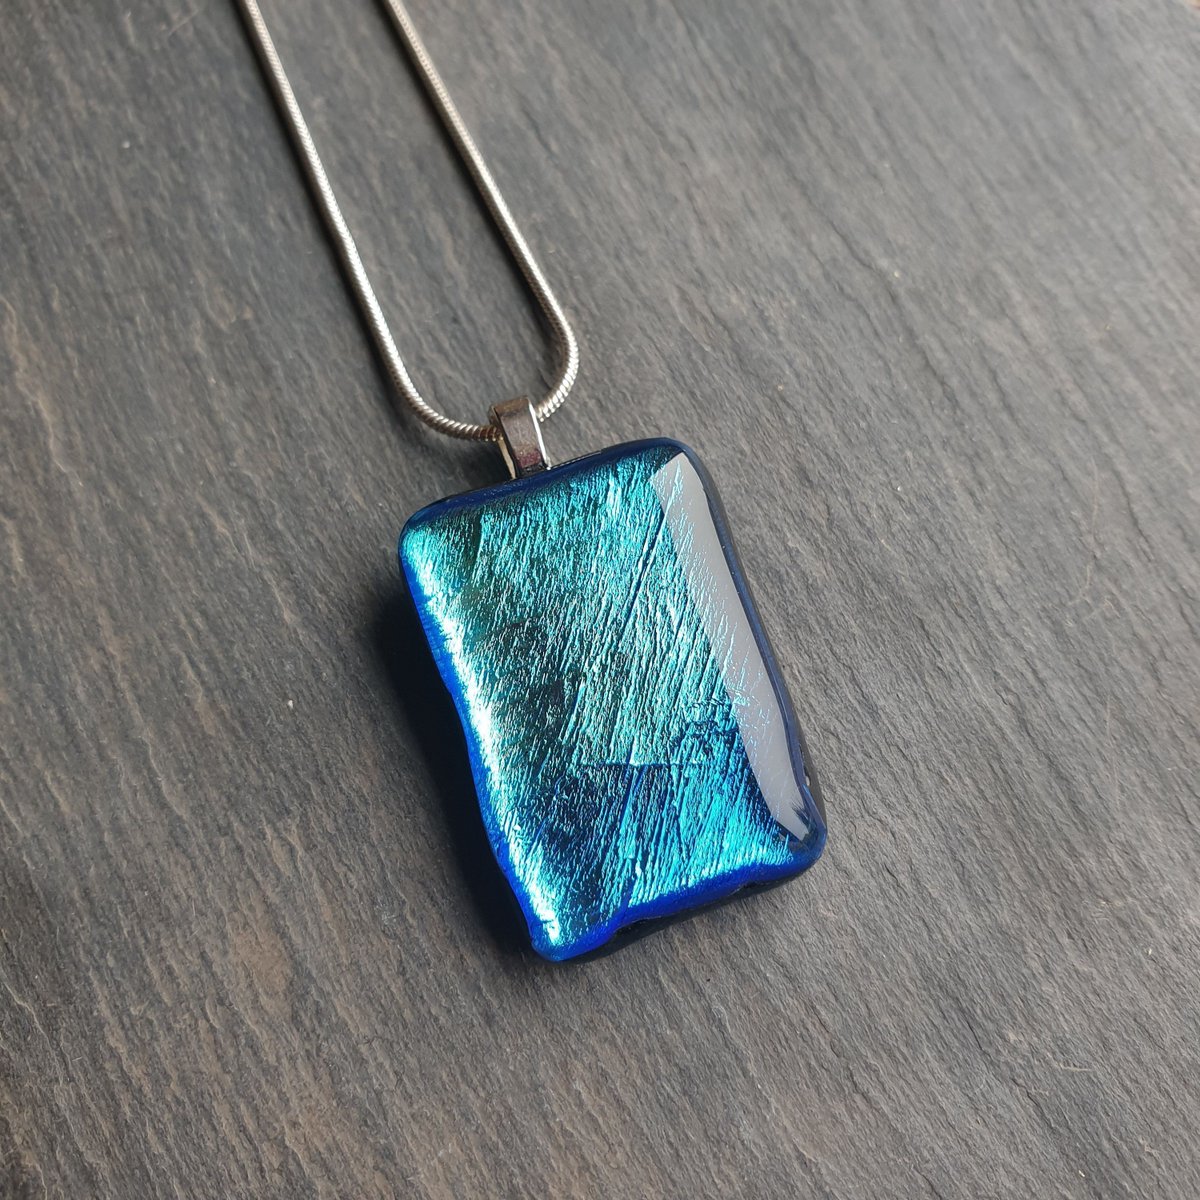 Stunning shimmering blue and green mirrored dichroic glass necklace. Lovely handcrafted sea themed pendant. #ukgiftam #ukgifthour #handmade #giftideas #shopindie #etsy #etsyuk .buff.ly/3Sr54zl